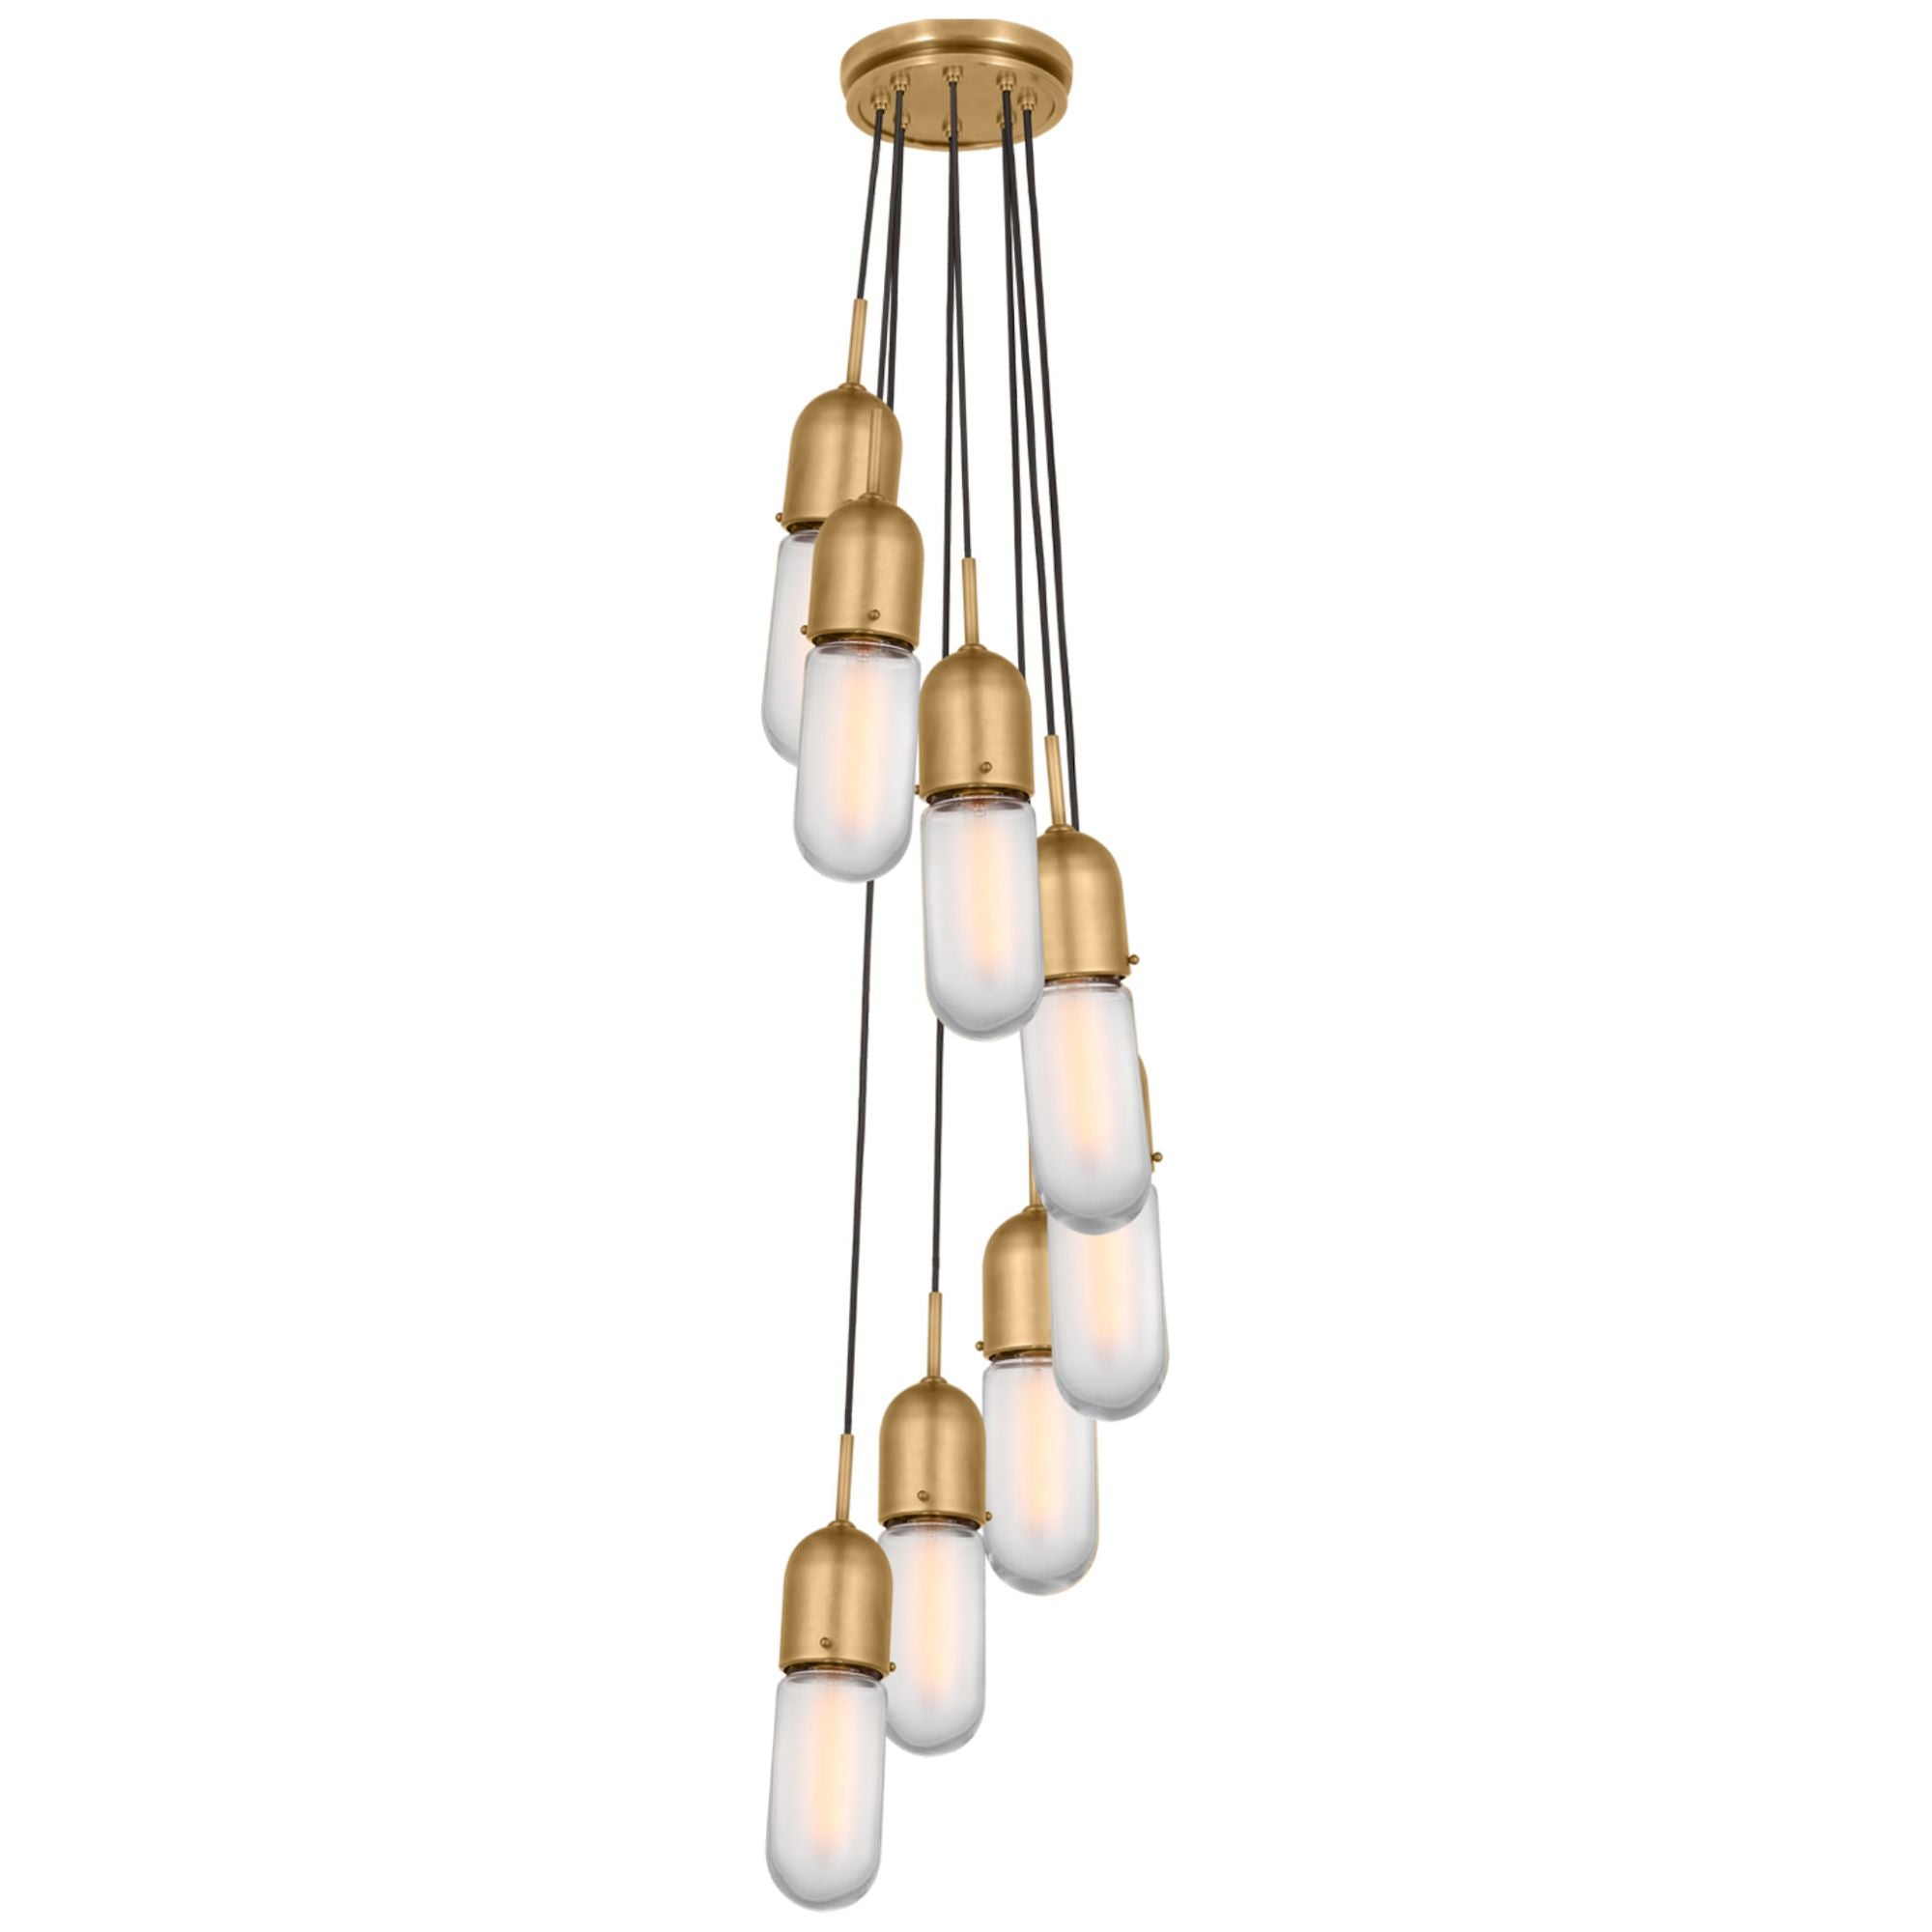 Thomas O'Brien Junio 8-Light Pendant in Hand-Rubbed Antique Brass with Frosted Glass